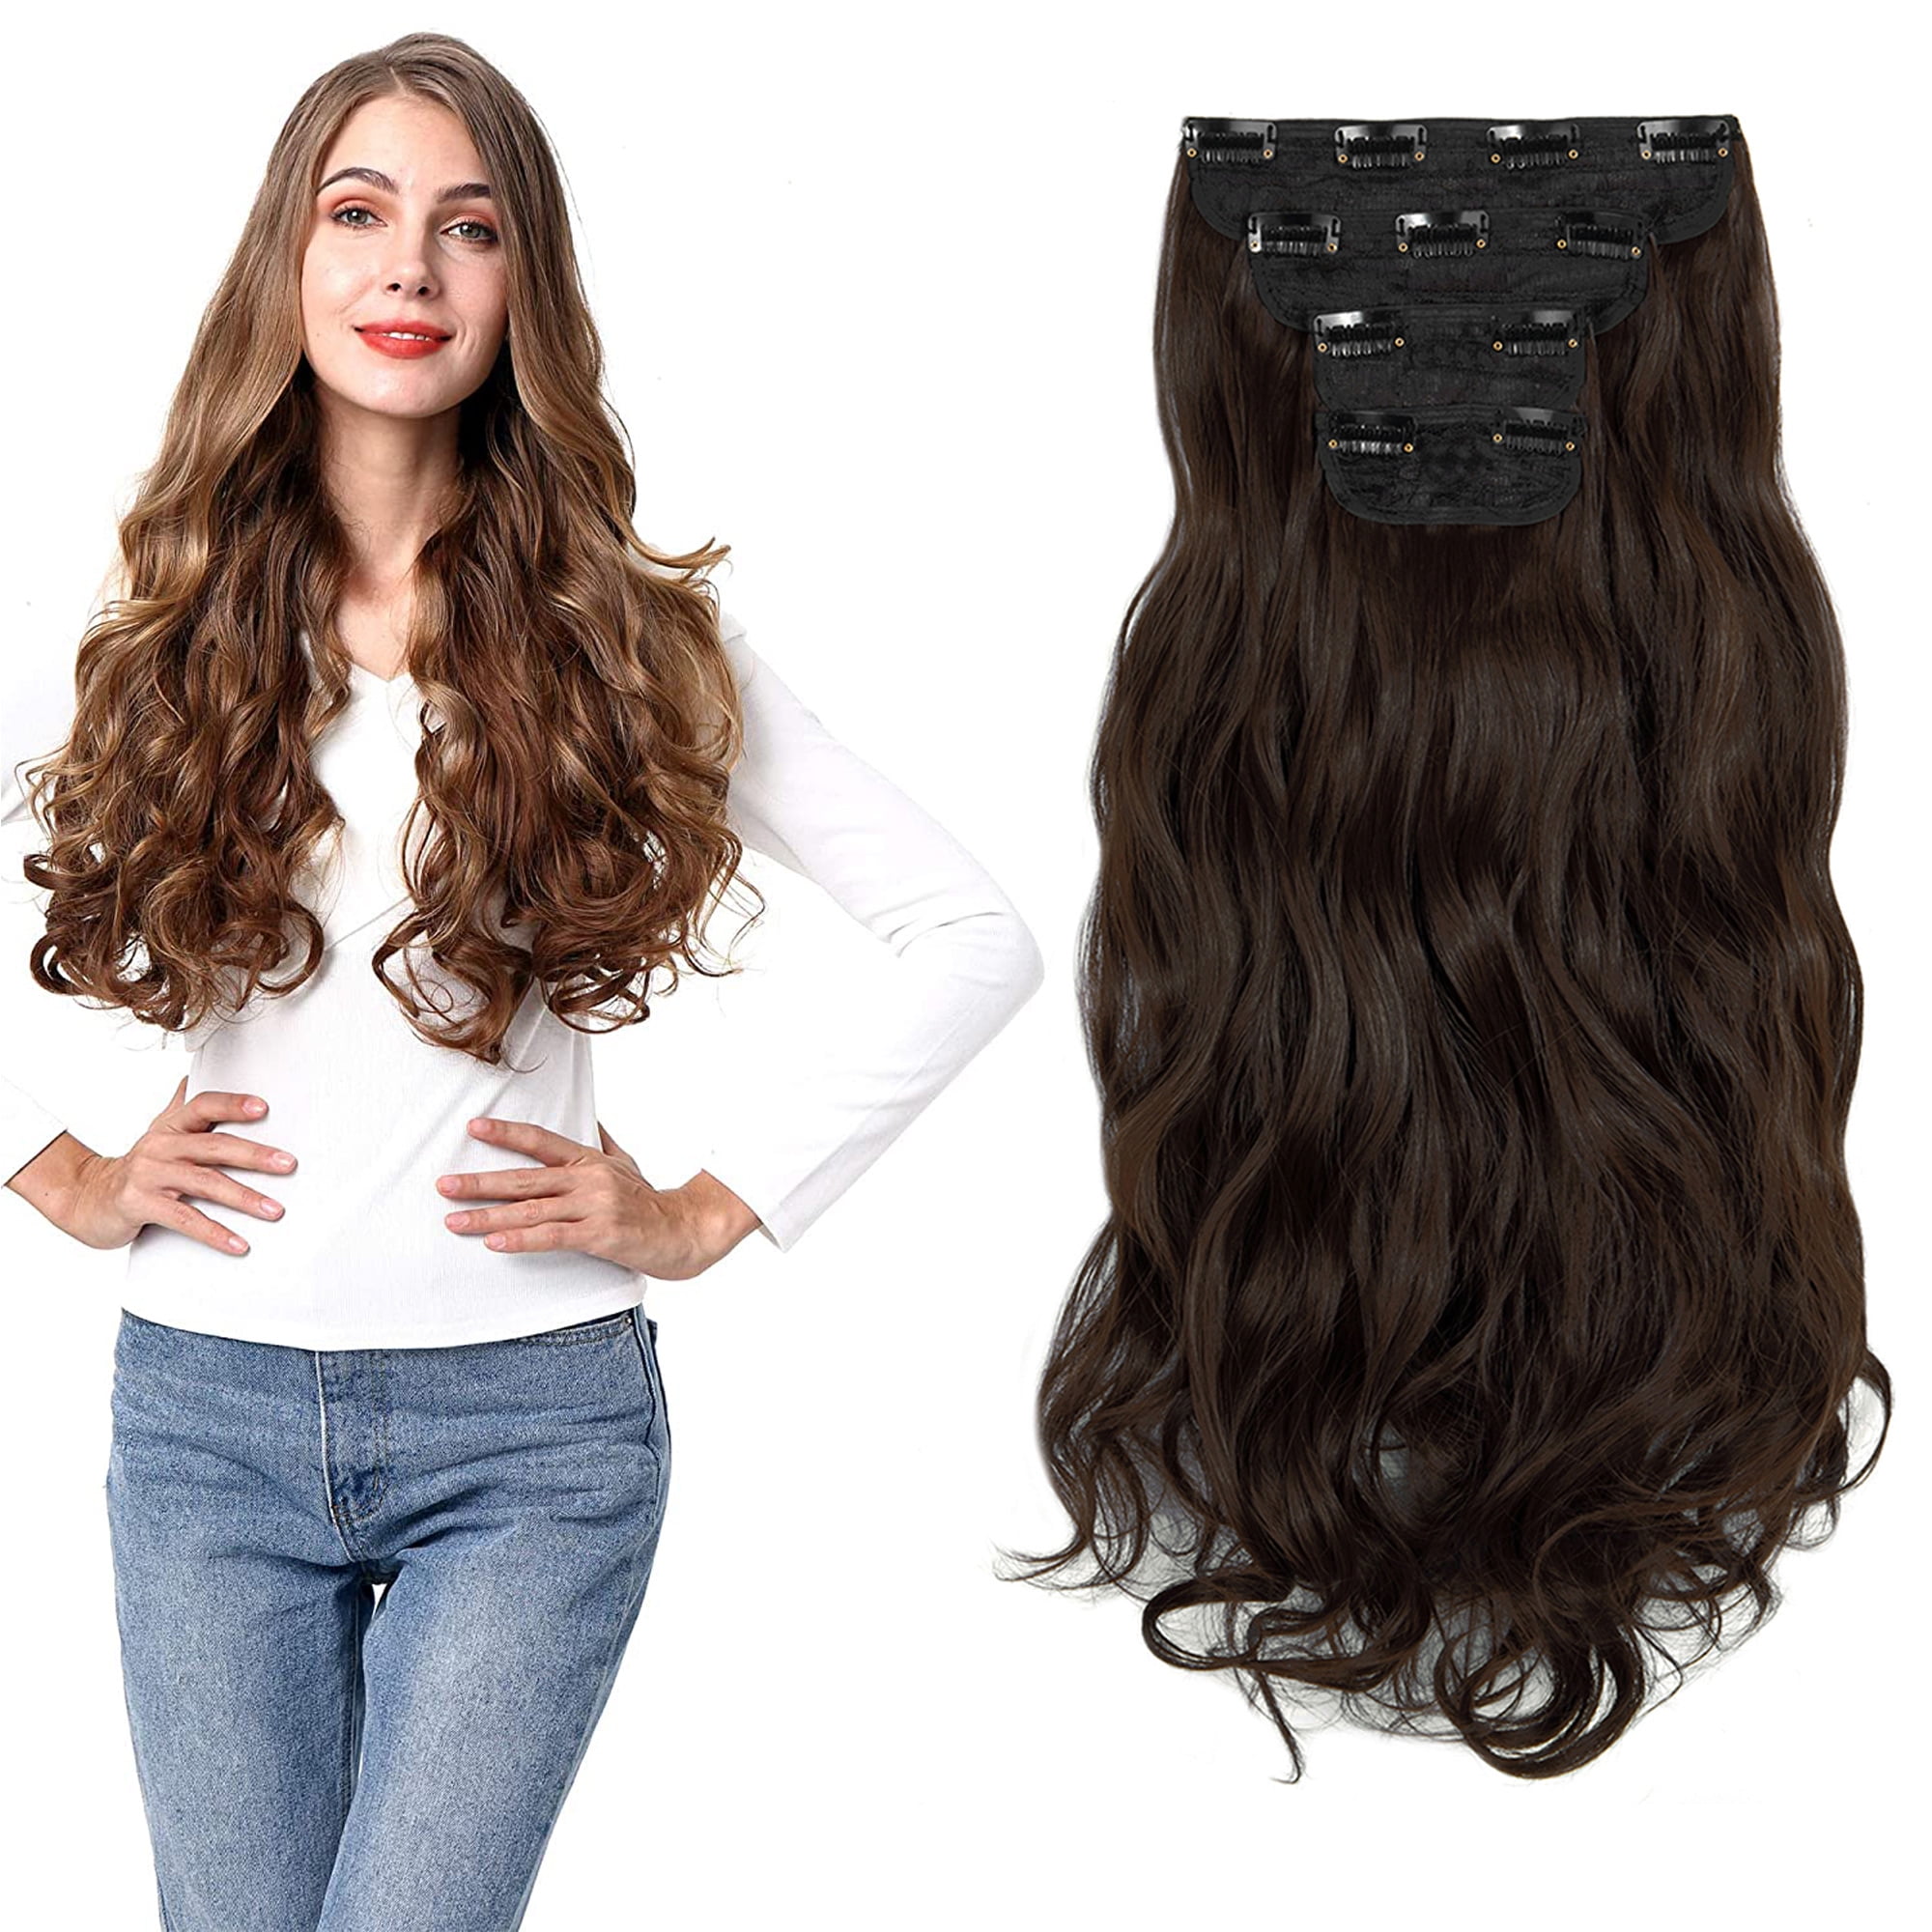 Excellent quality super long clips in hair extensions synthetic hair curly  thick 1 piece for full head high quality